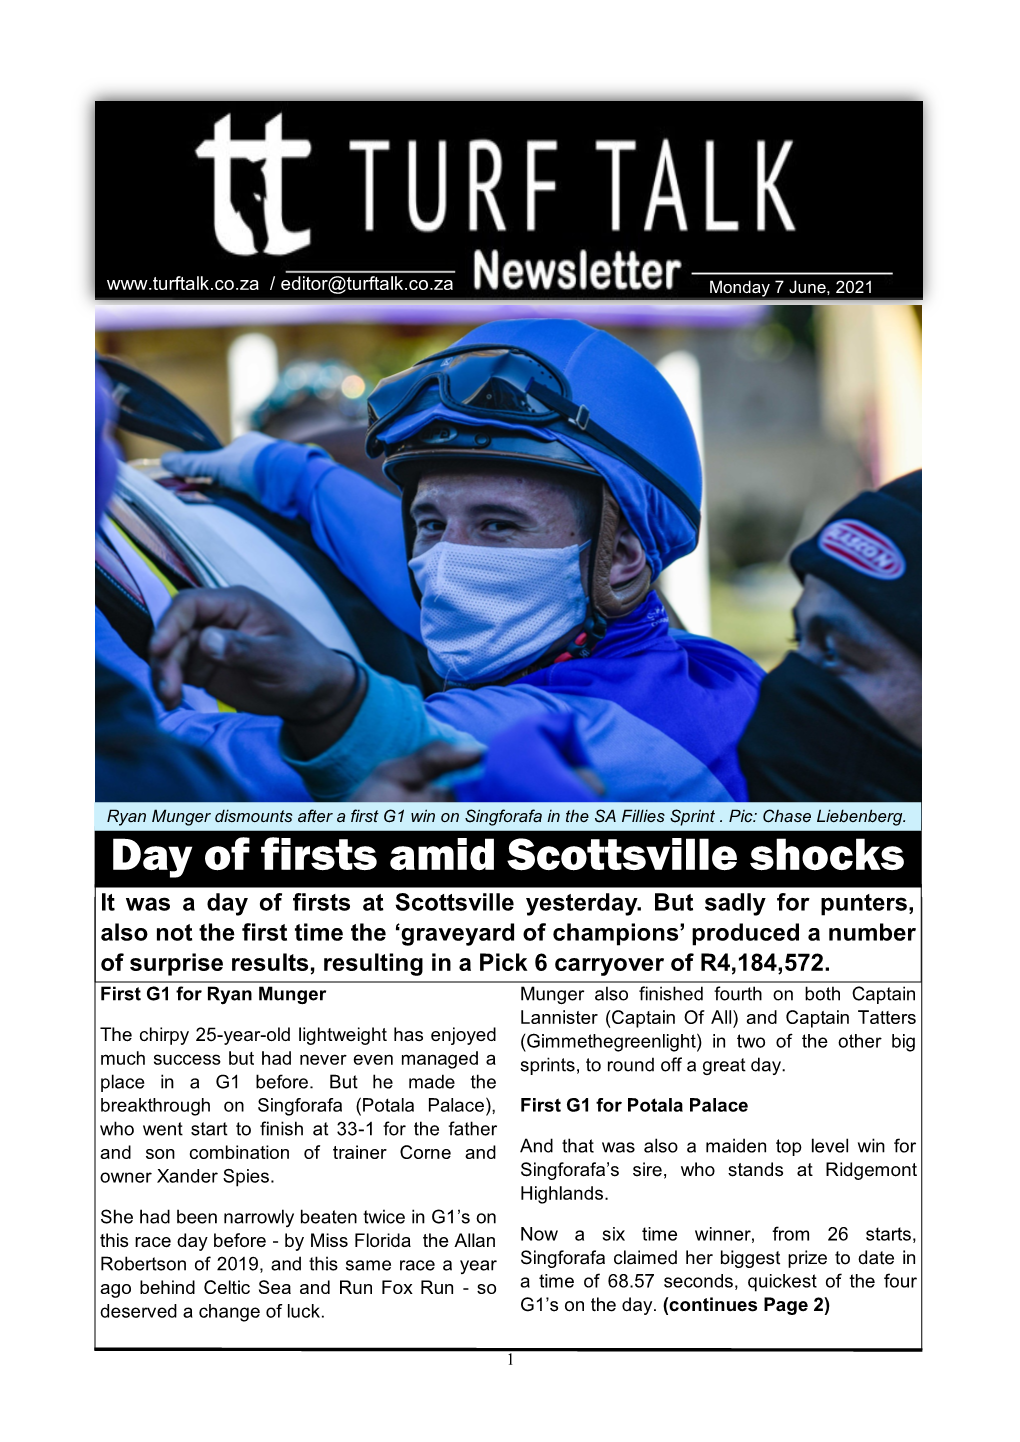 Day of Firsts Amid Scottsville Shocks It Was a Day of Firsts at Scottsville Yesterday